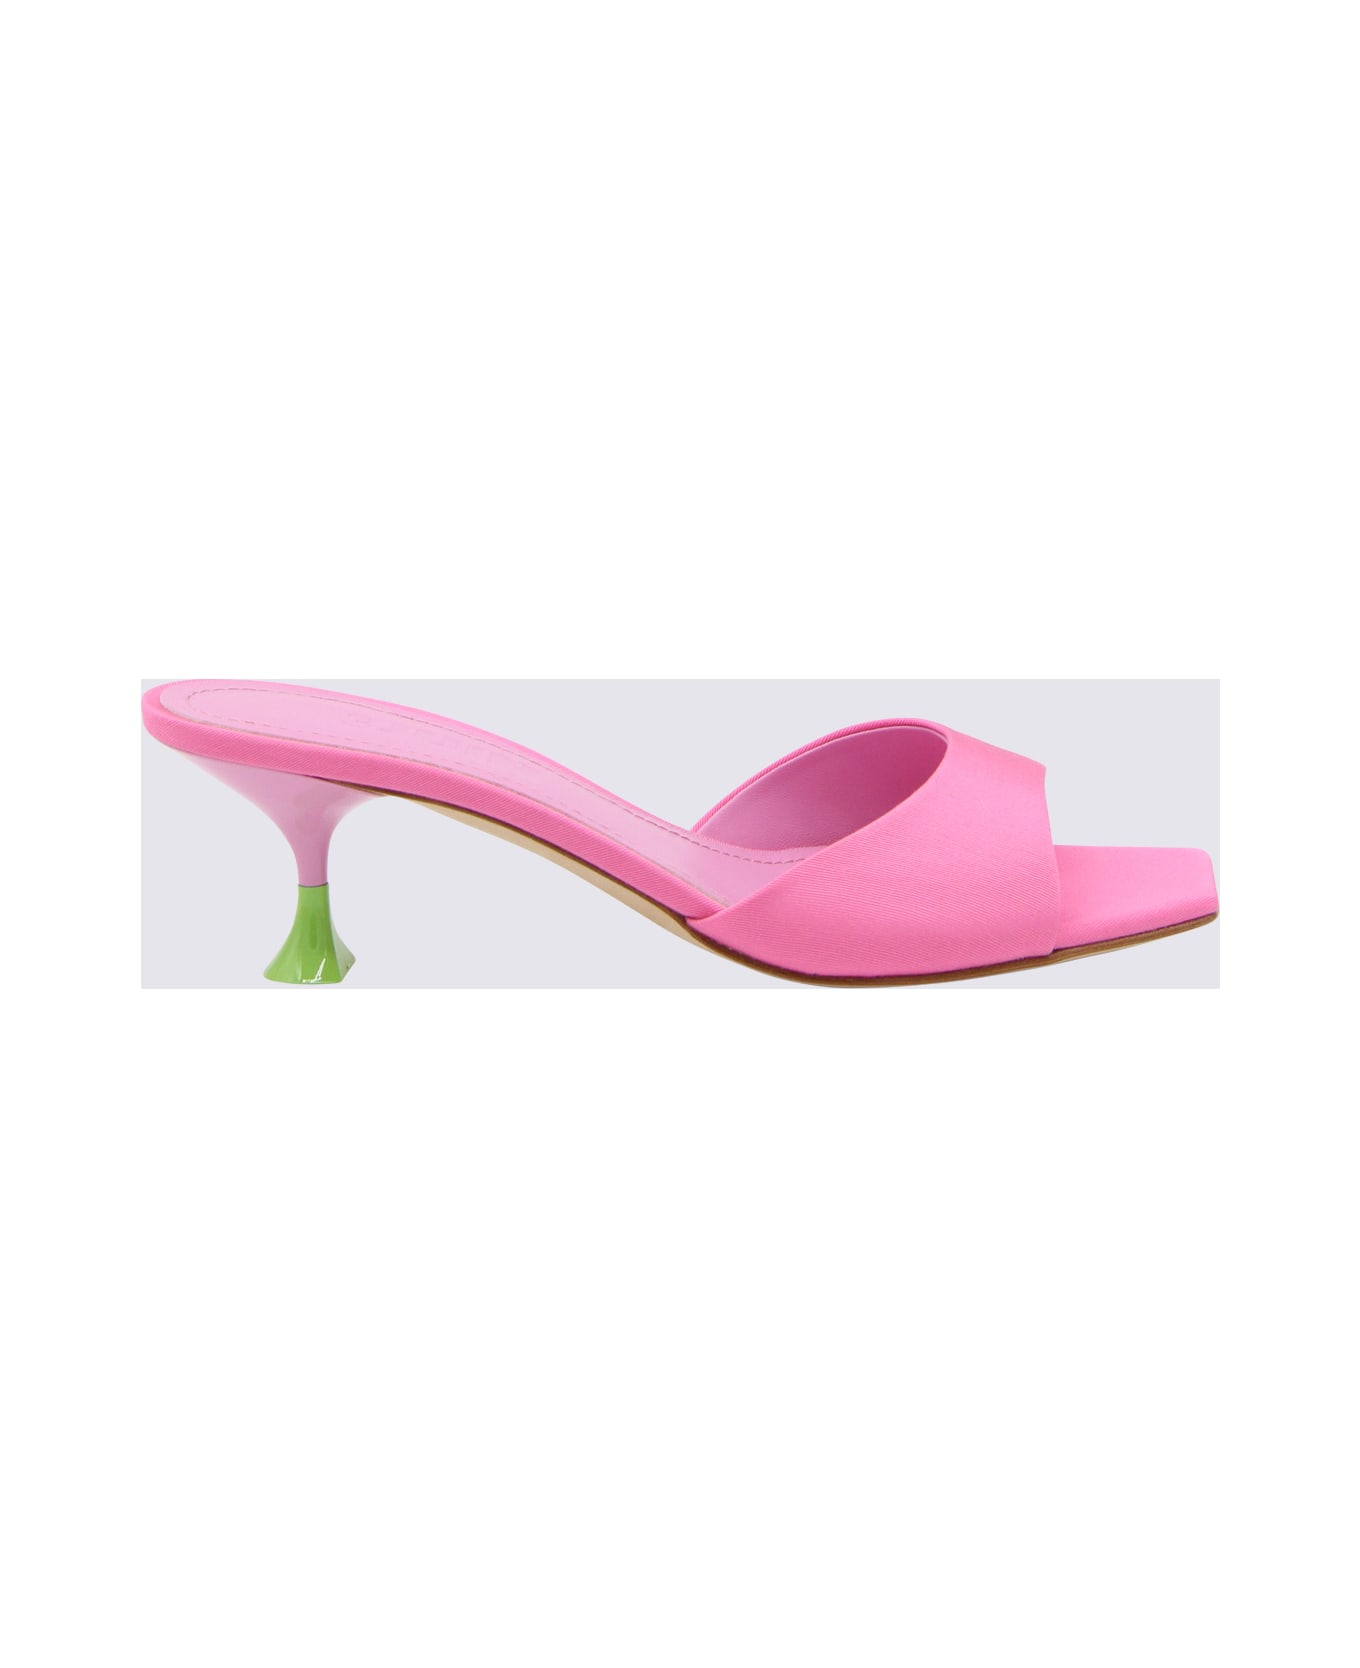 3JUIN Candy Leather Kimi Cannette Mules - Pink